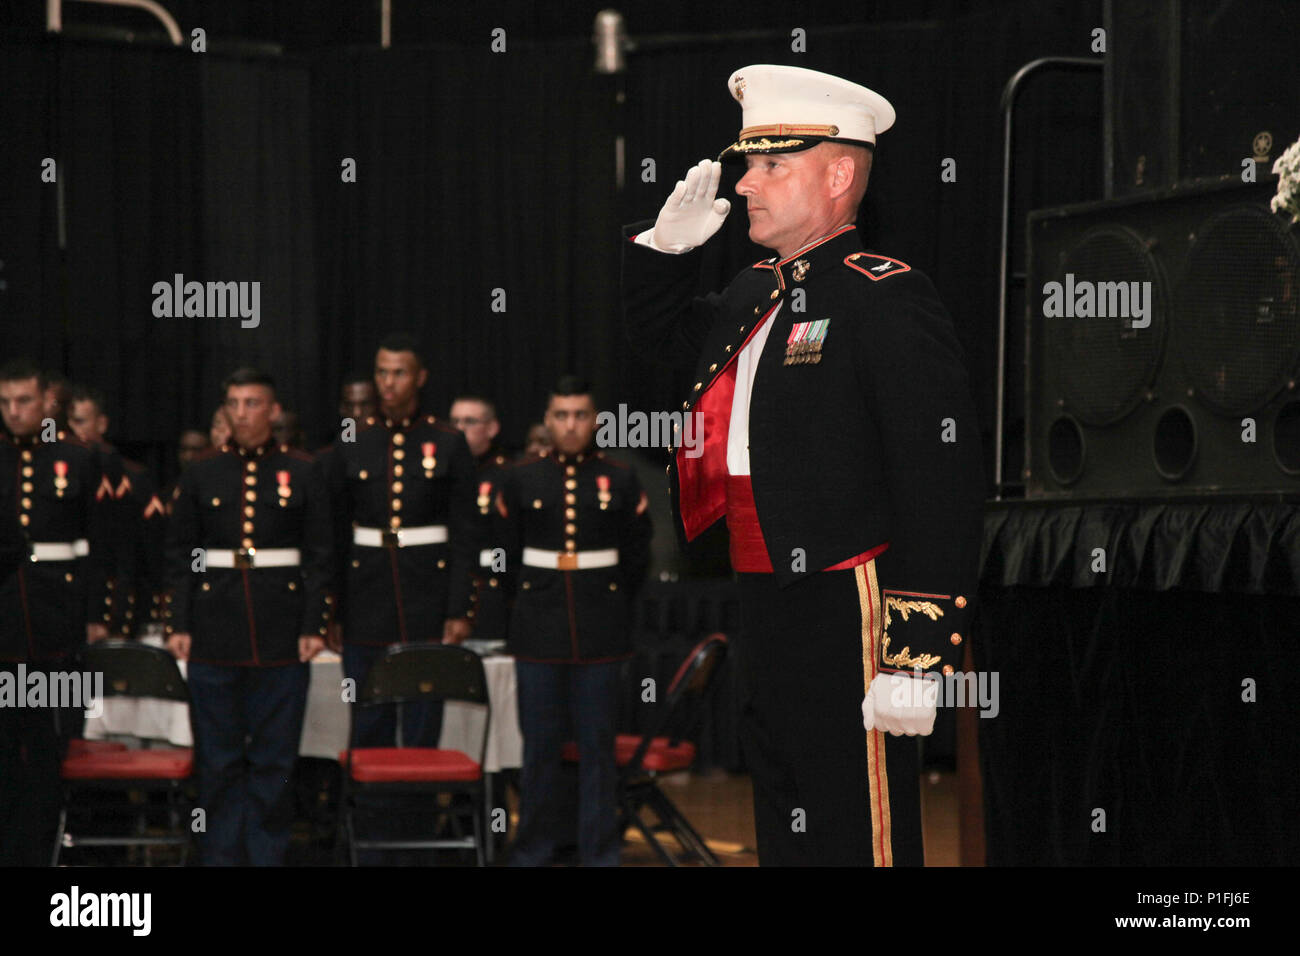 U.S. Marine Corps Col. David P. Grant, commanding officer of Marine Corps Combat Service Support Schools (MCCSSS), renders a salute during the student Marine Corps birthday ball ceremony held at Camp Lejeune, N.C., Oct. 29, 2016. Students from Financial Management School, Ground Supply School, Personnel Administration School, and Logistics Operations School attended their first Marine Corps Ball to celebrate the 241st Marine Corps Birthday. (U.S. Marine Corps photo by Lance Cpl. Jose D. Villalobosrocha) Stock Photo